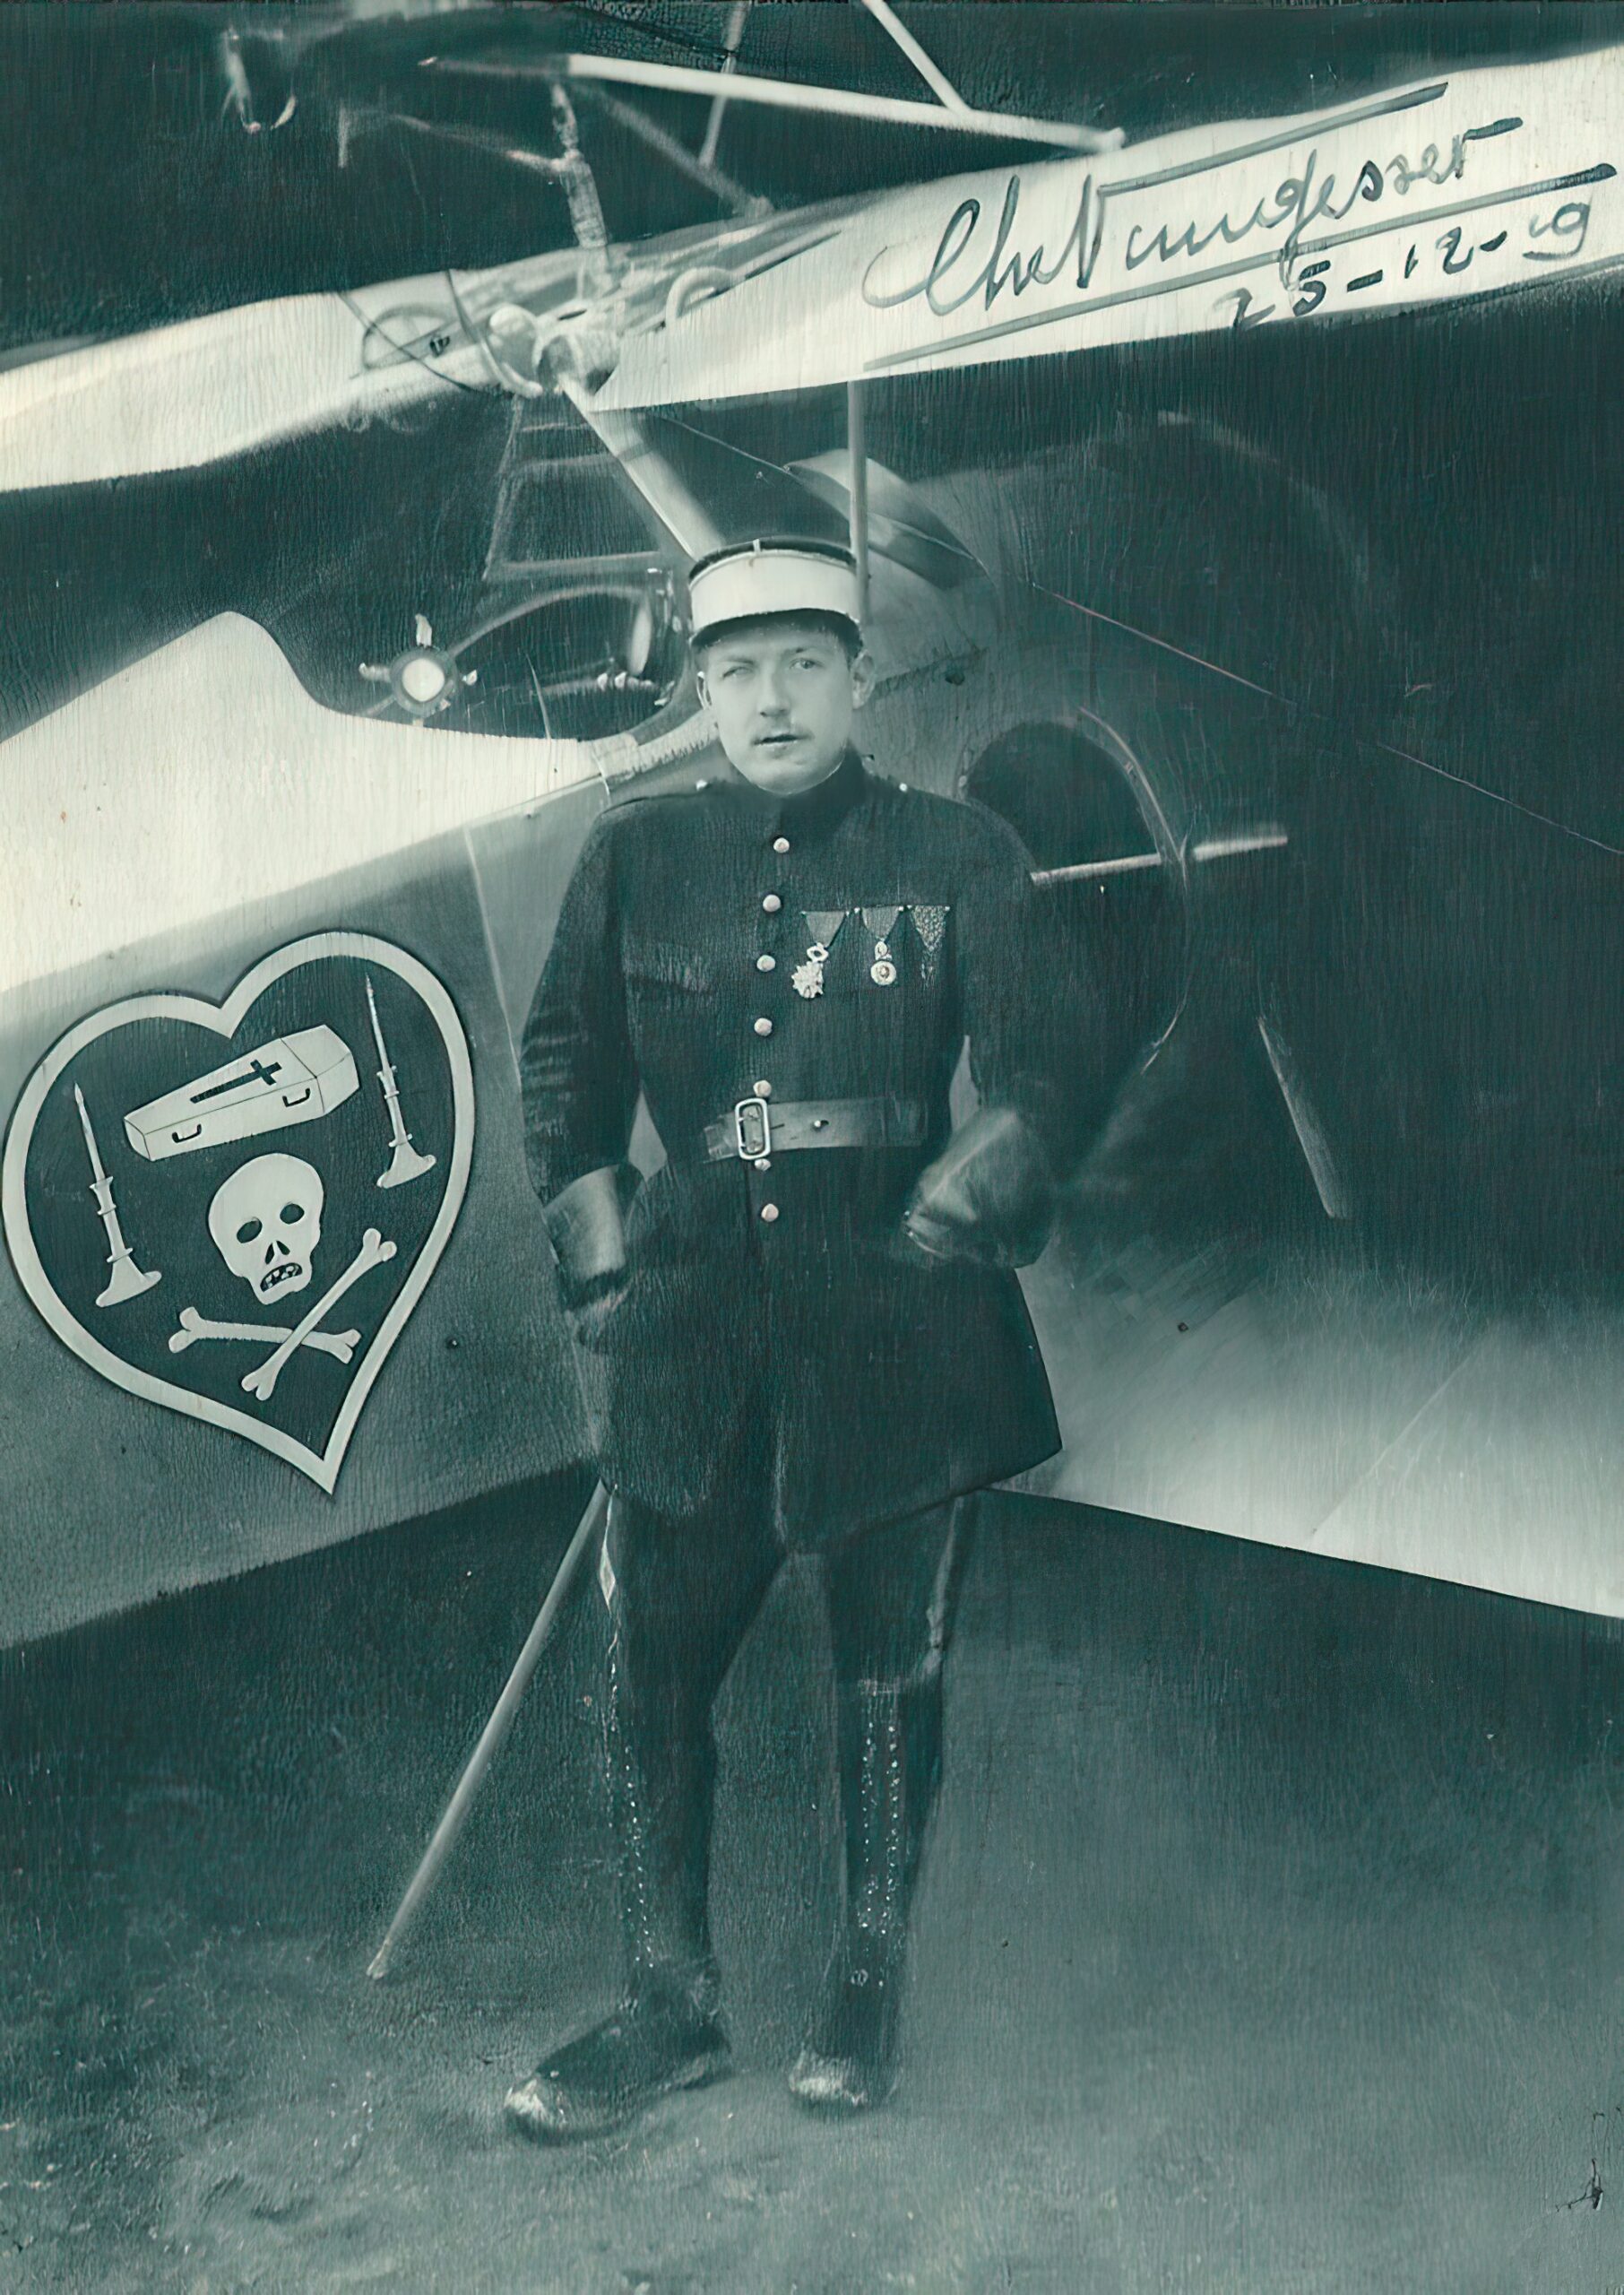 'The Knight of Death', Nungesser with his Nieuport 17